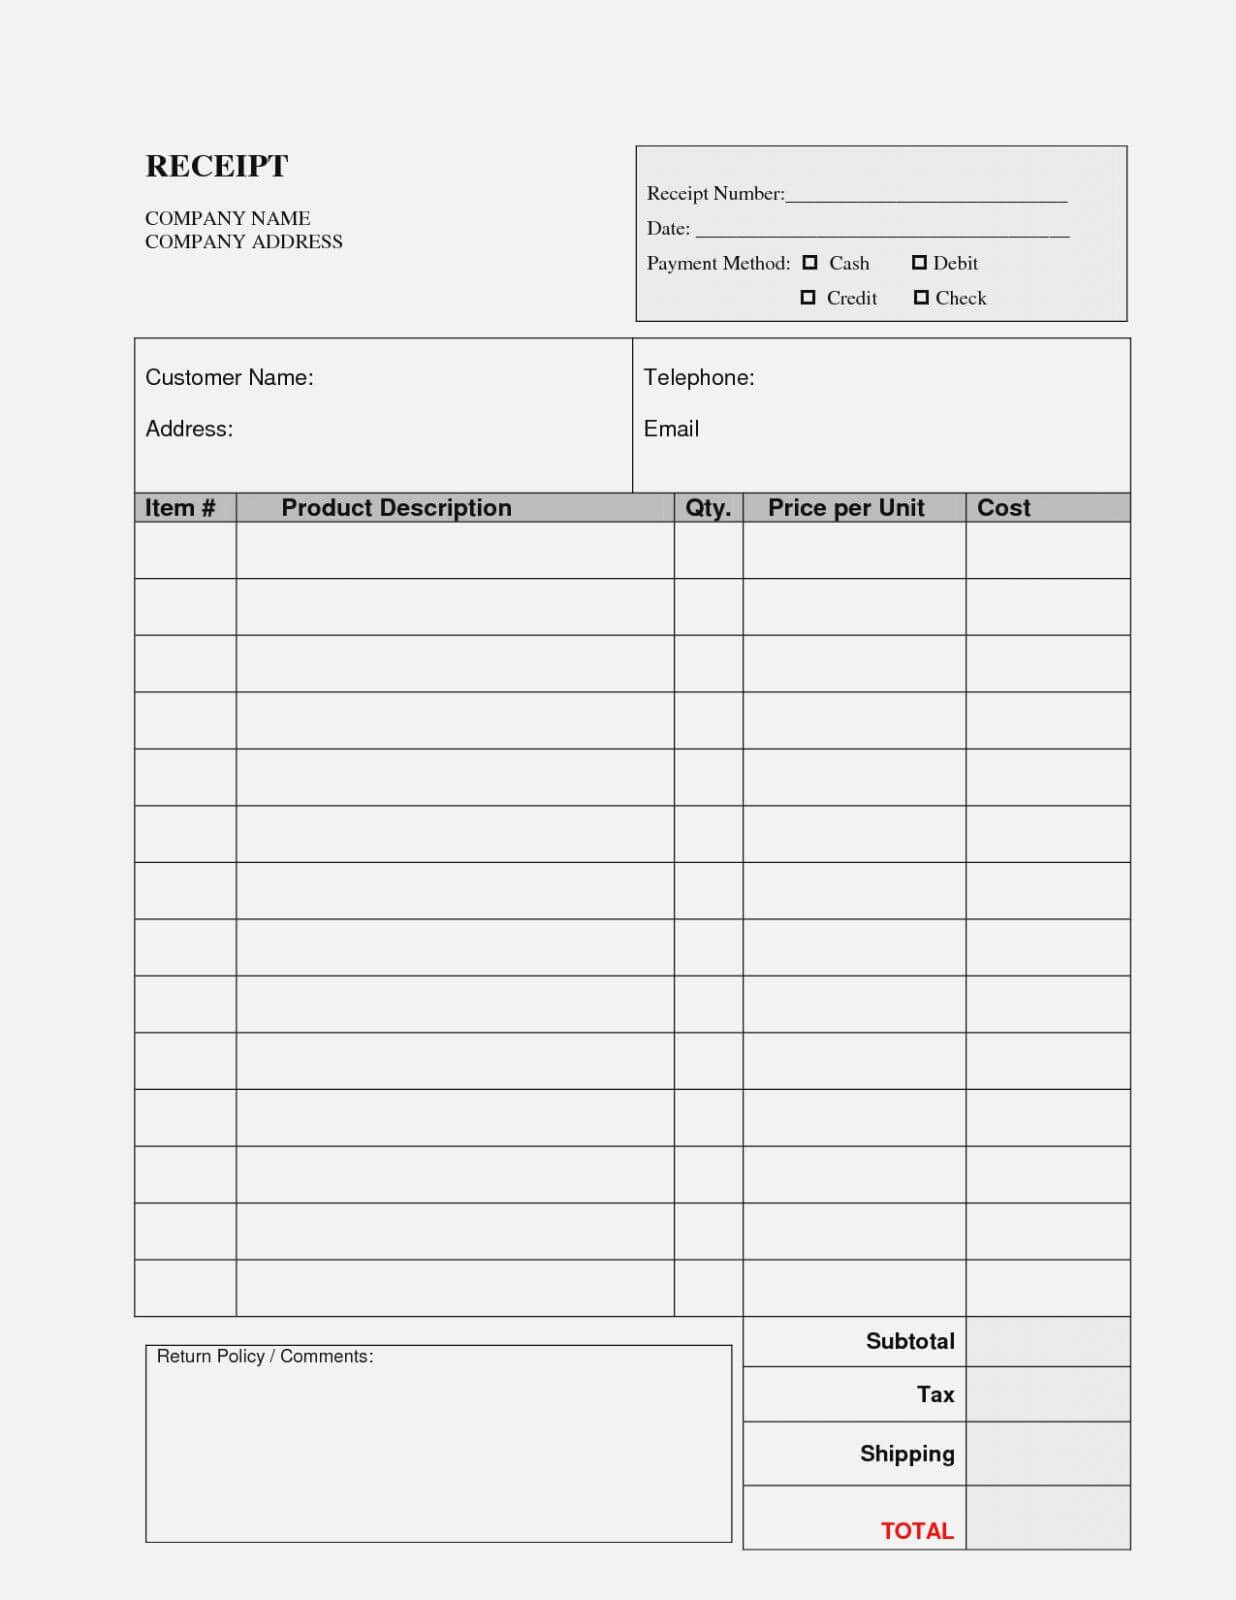 Unique Blank Invoice Word #xls #xlsformat #xlstemplates For Free Printable Invoice Template Microsoft Word